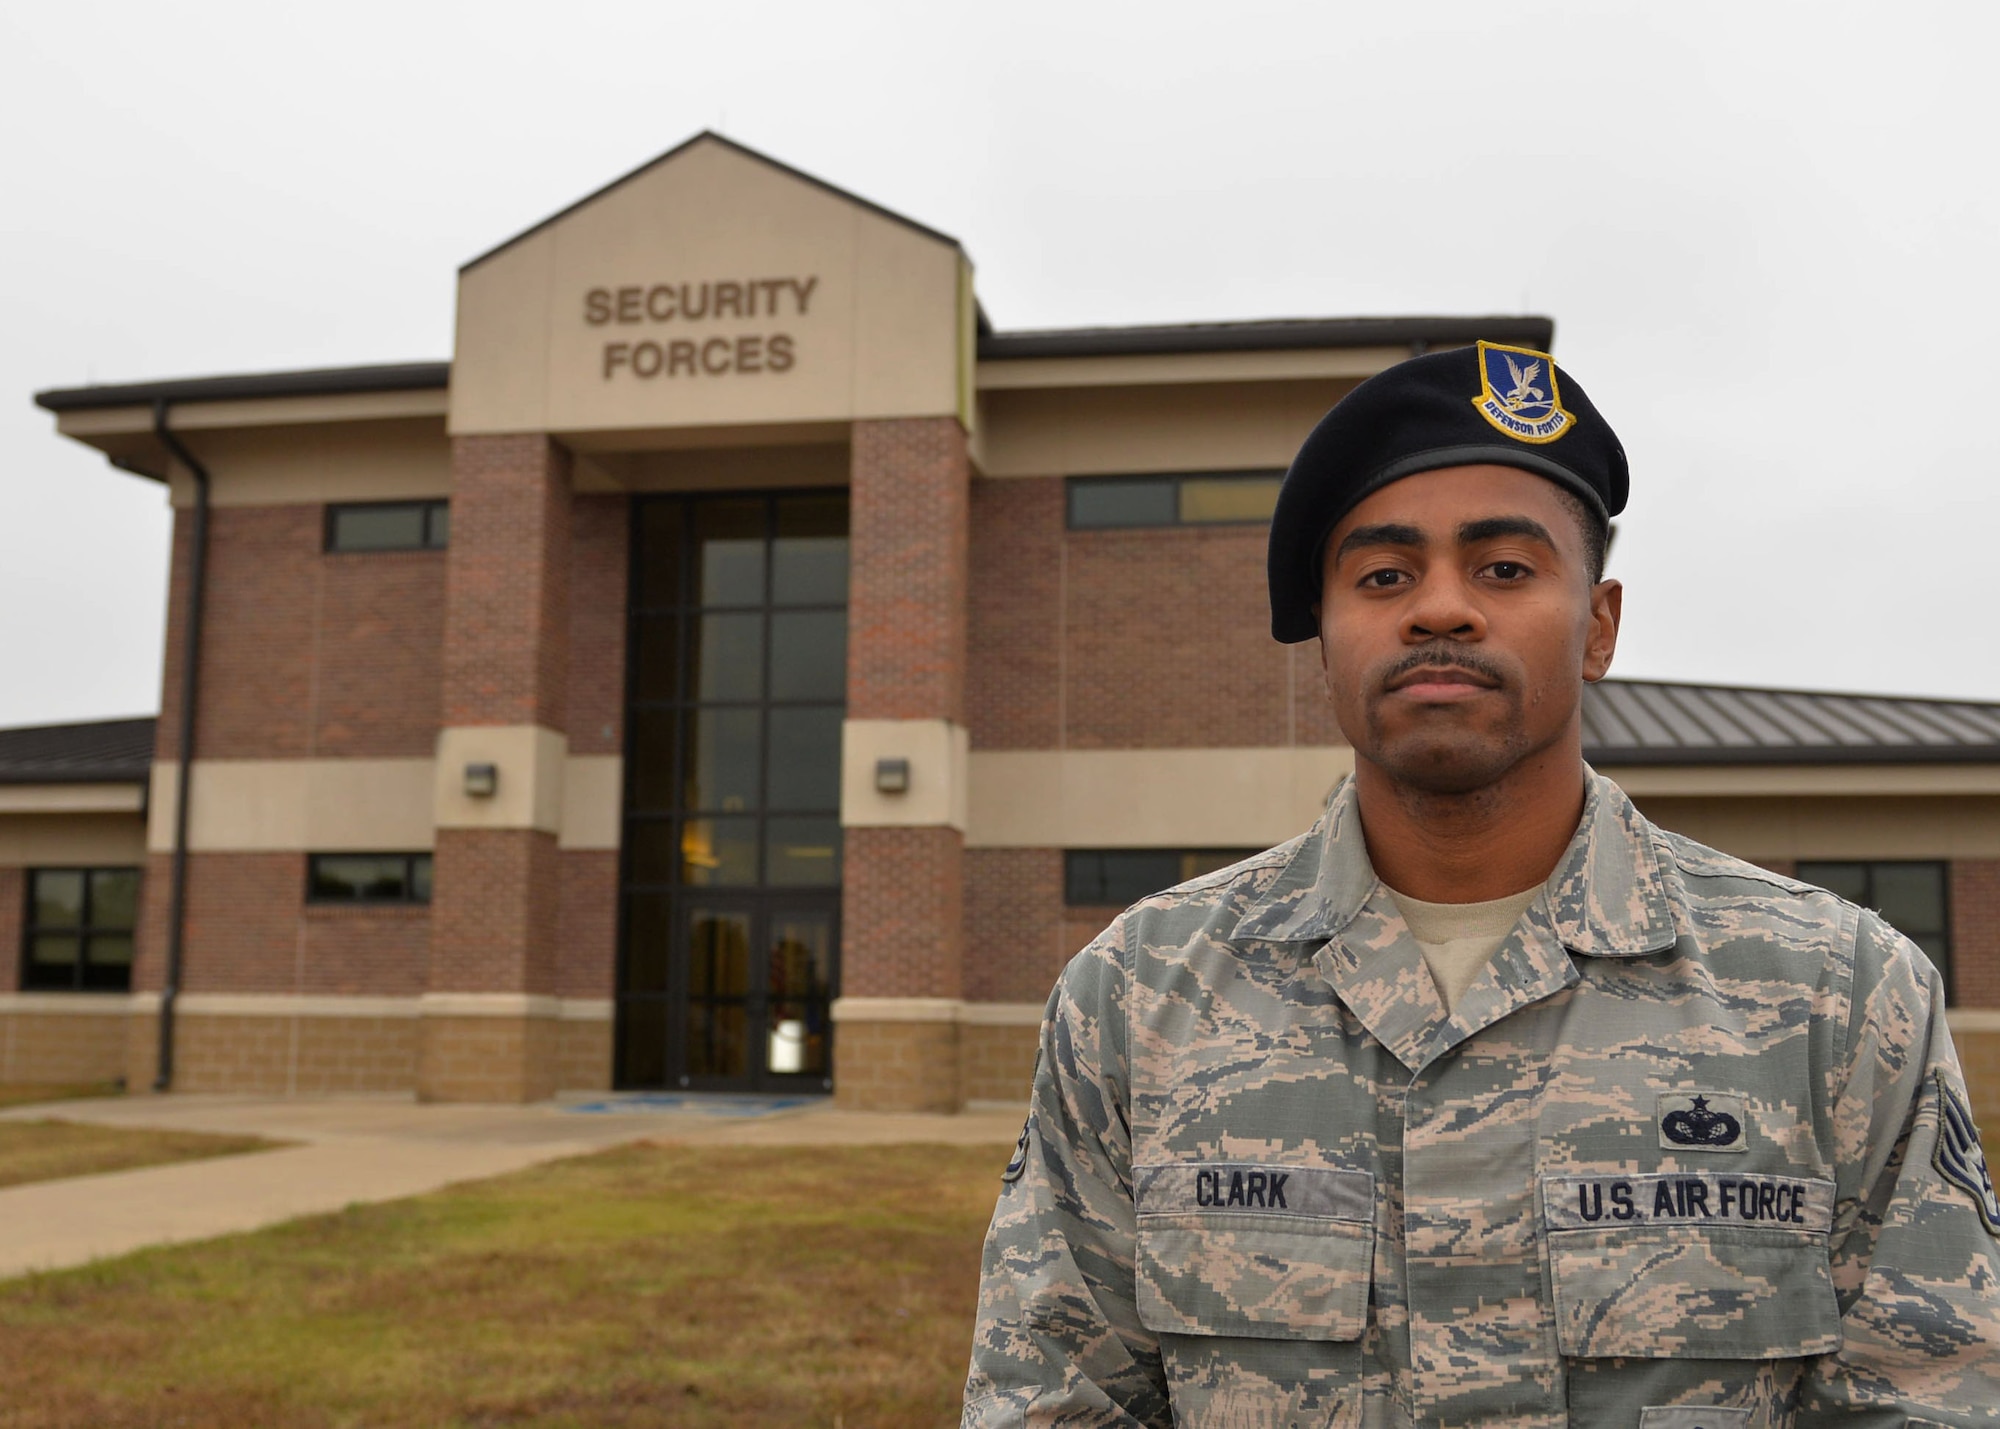 Staff Sgt. George Clark, 19th Security Forces Squadron base defense operations center controller, is nominated as the Combat Airlifter of the Week Nov. 6, 2017 at Little Rock Air Force Base, Ark.